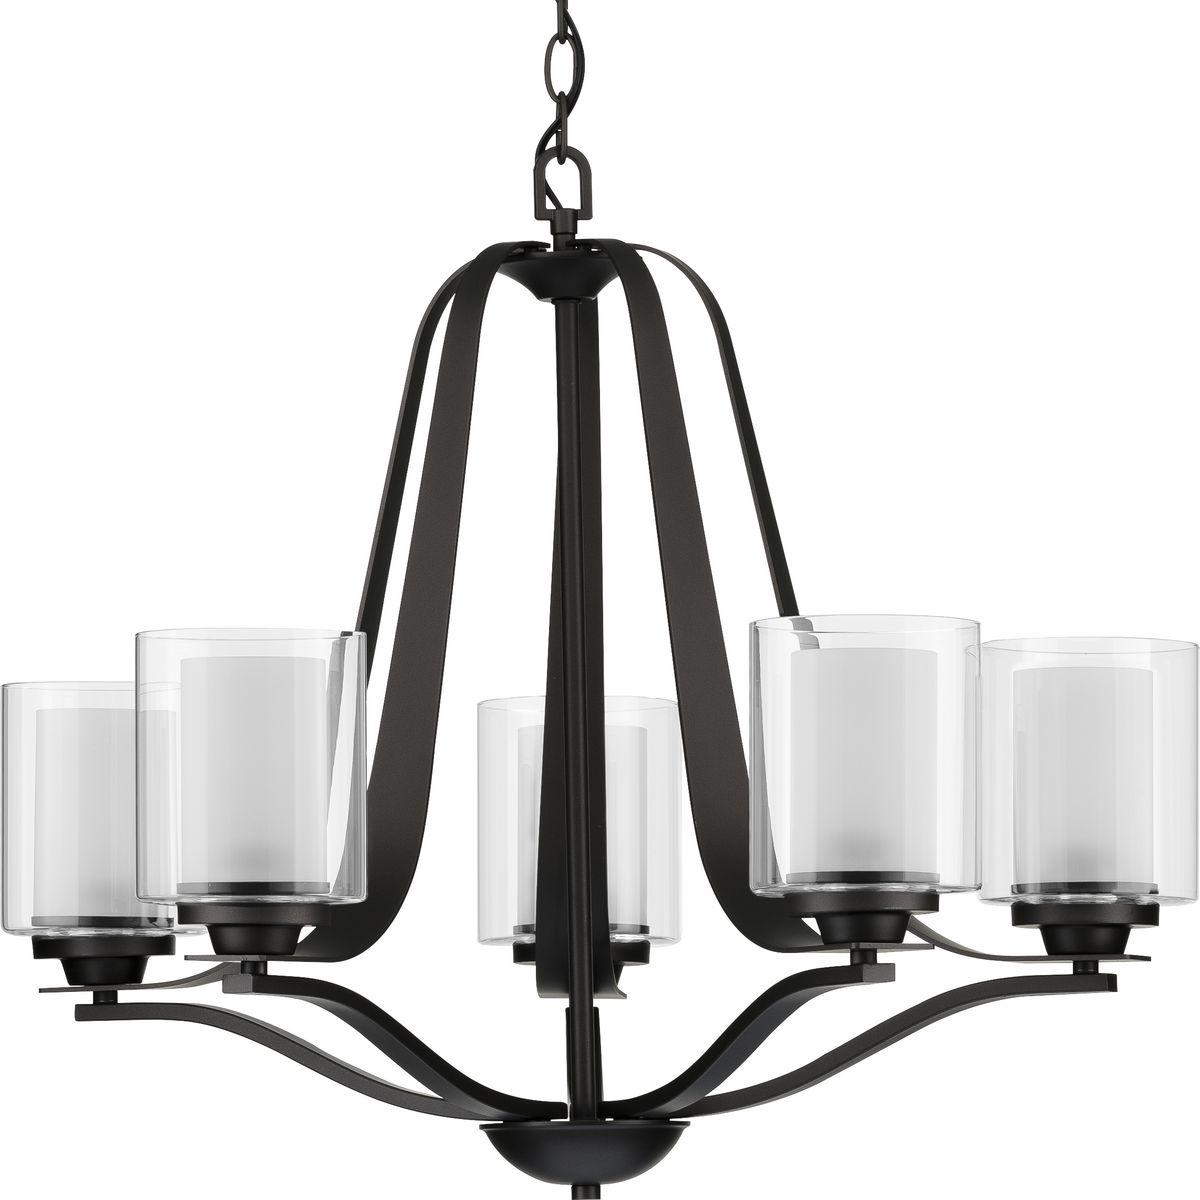 Hubbell P400095-143 Add a modern romance to the heart of your home with this lovely chandelier. Quiet etched glass diffusers are surrounded by clear outer glass shades for a soft, luxurious touch. The shades sit on an elegant graphite frame with gently flowing arms.  ; Quiet